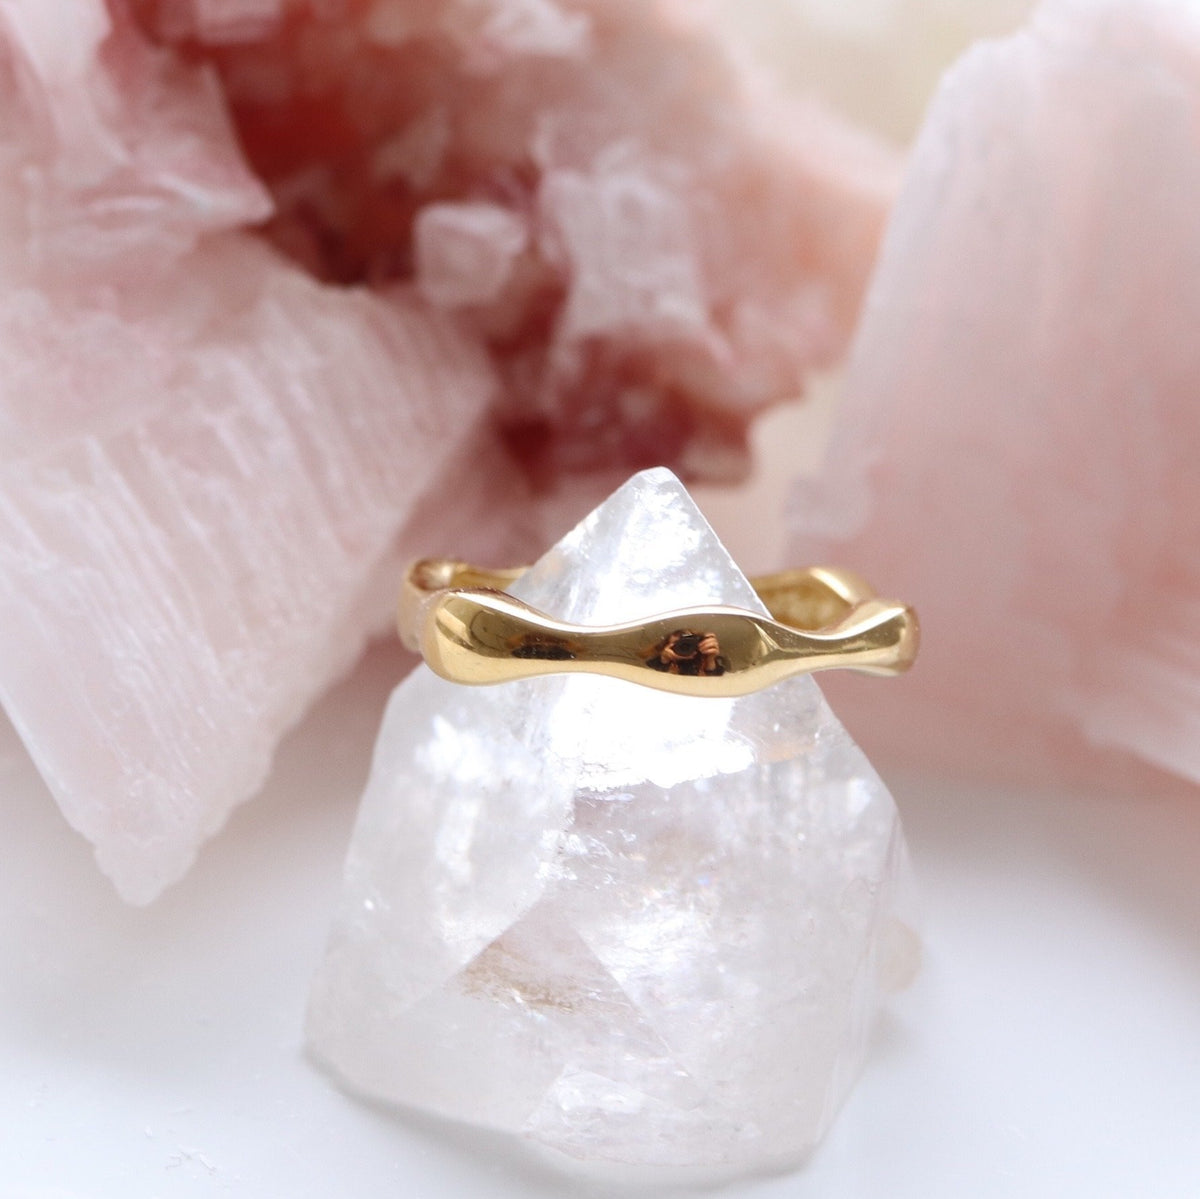 KIND BAND RING - GOLD - SO PRETTY CARA COTTER